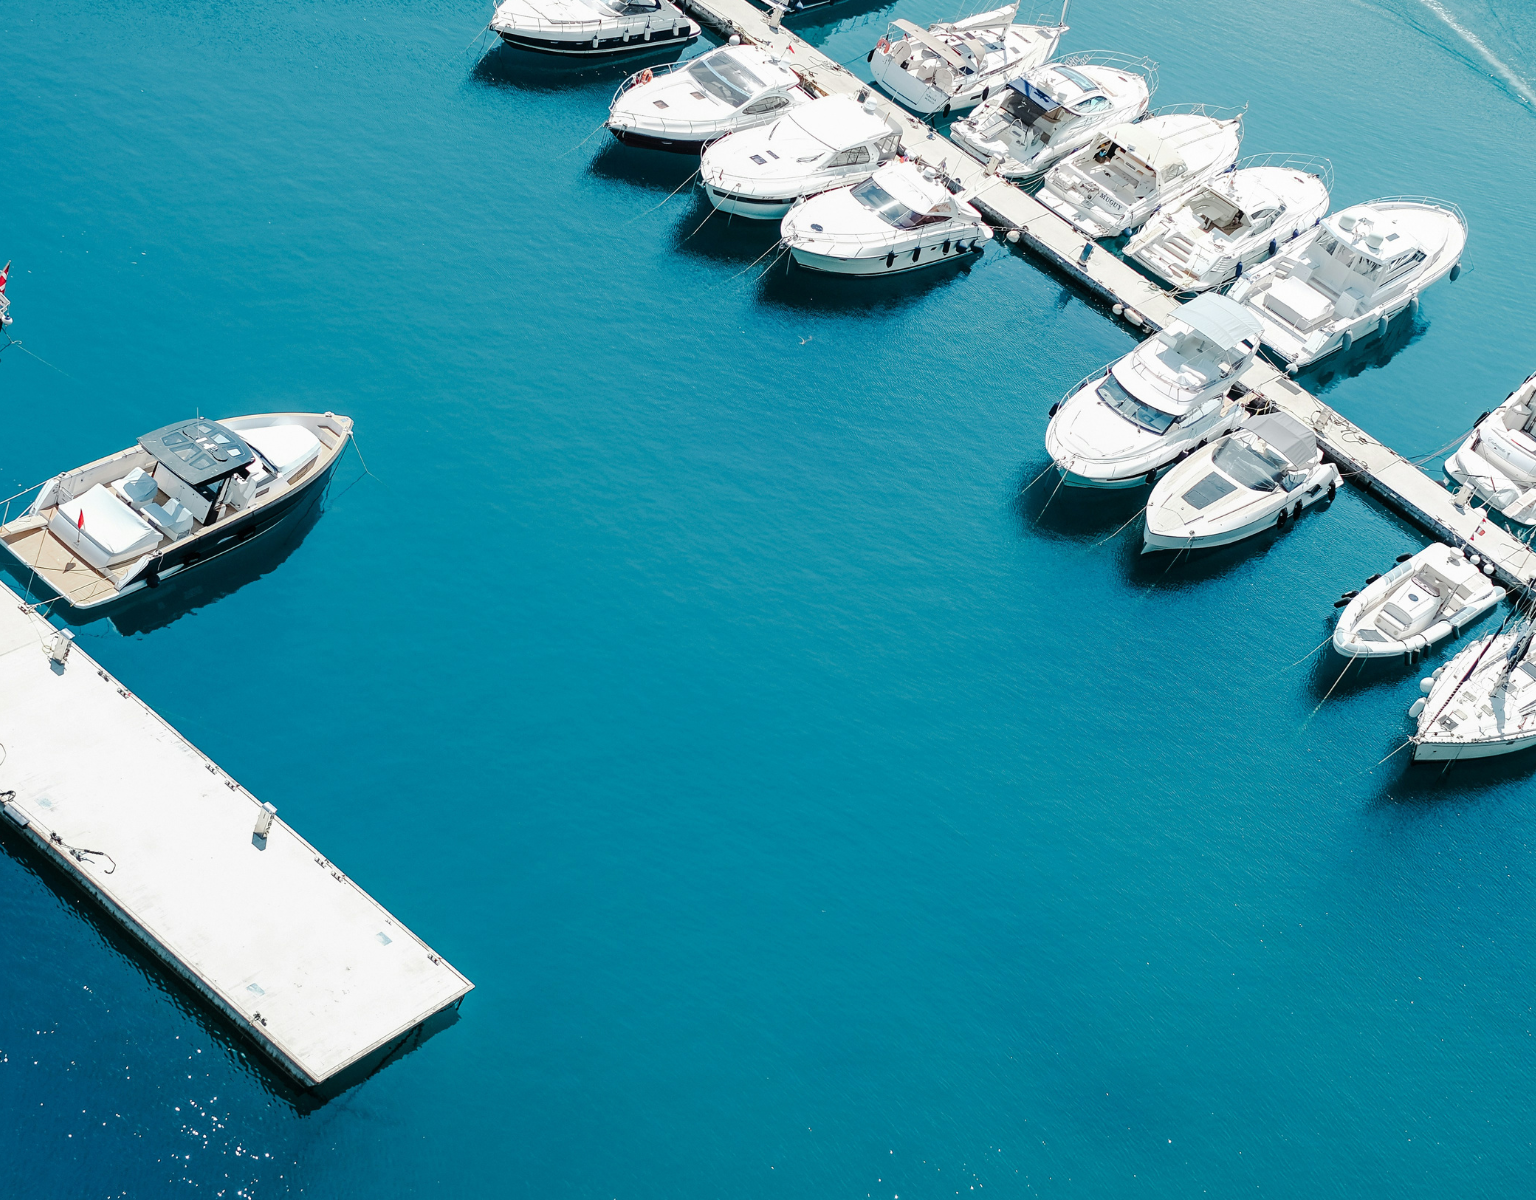 Isiteek product range page featuring a marina full of boats.